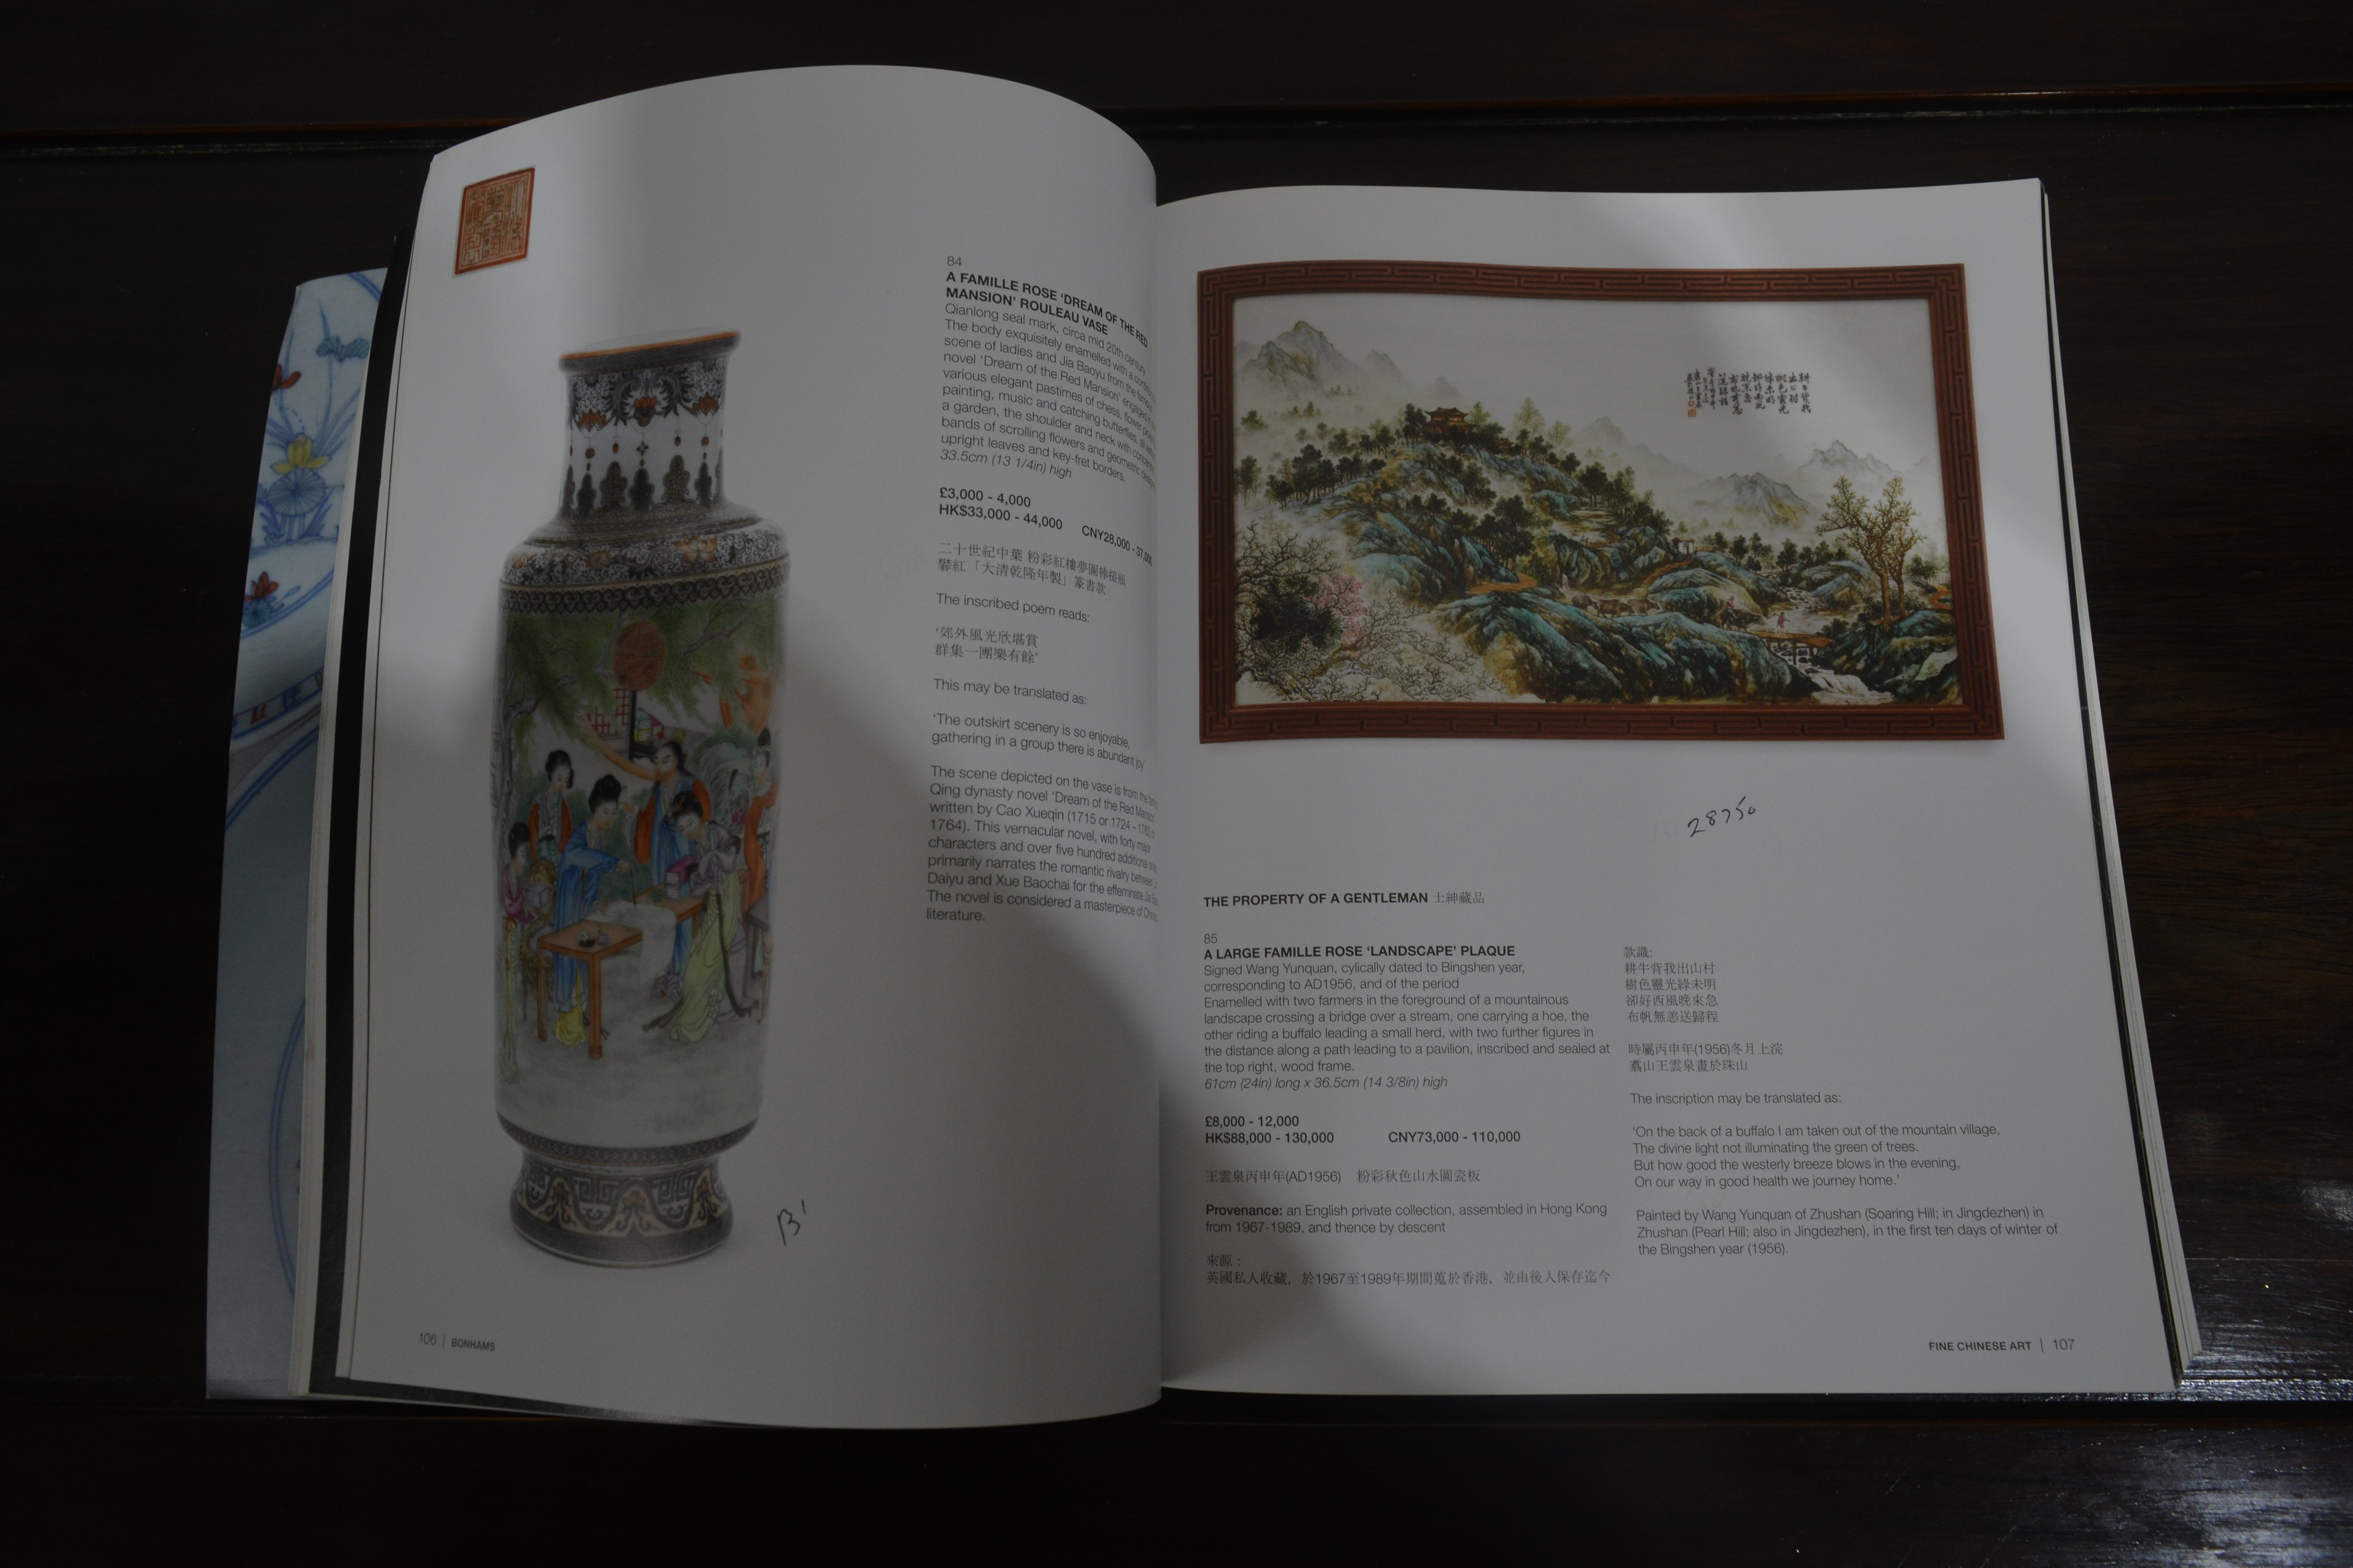 Collection of catalogues on Asian art Bonhams, to include Fine Chinese Art, 12 May 2016, London, - Image 4 of 8